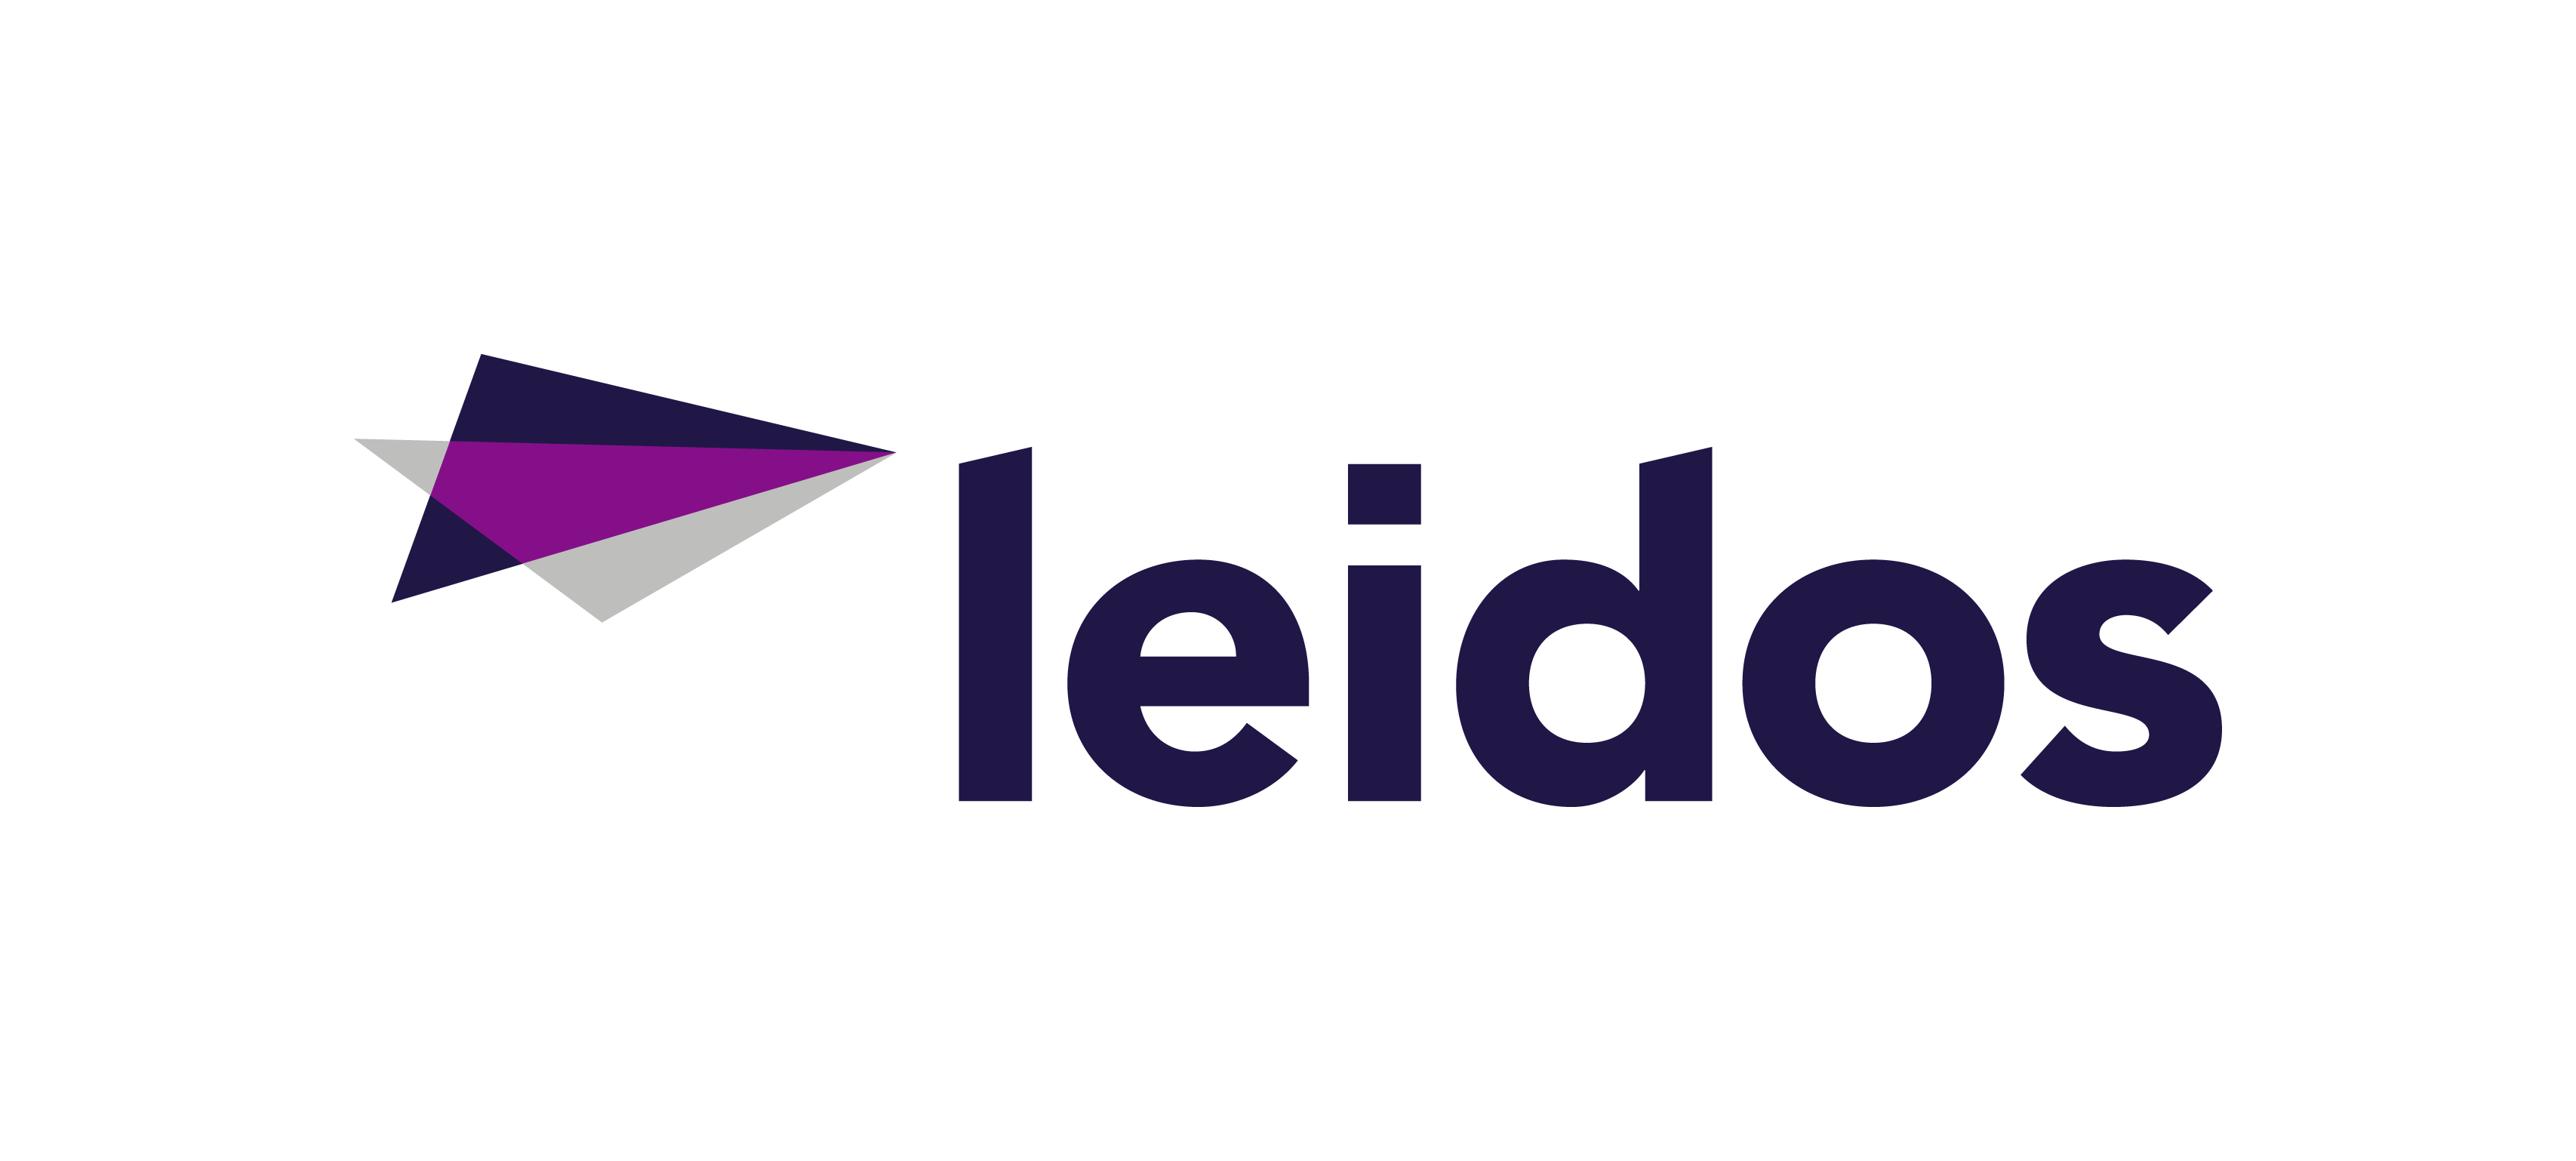 Center for medicare and medicaid services leidos life at conduent